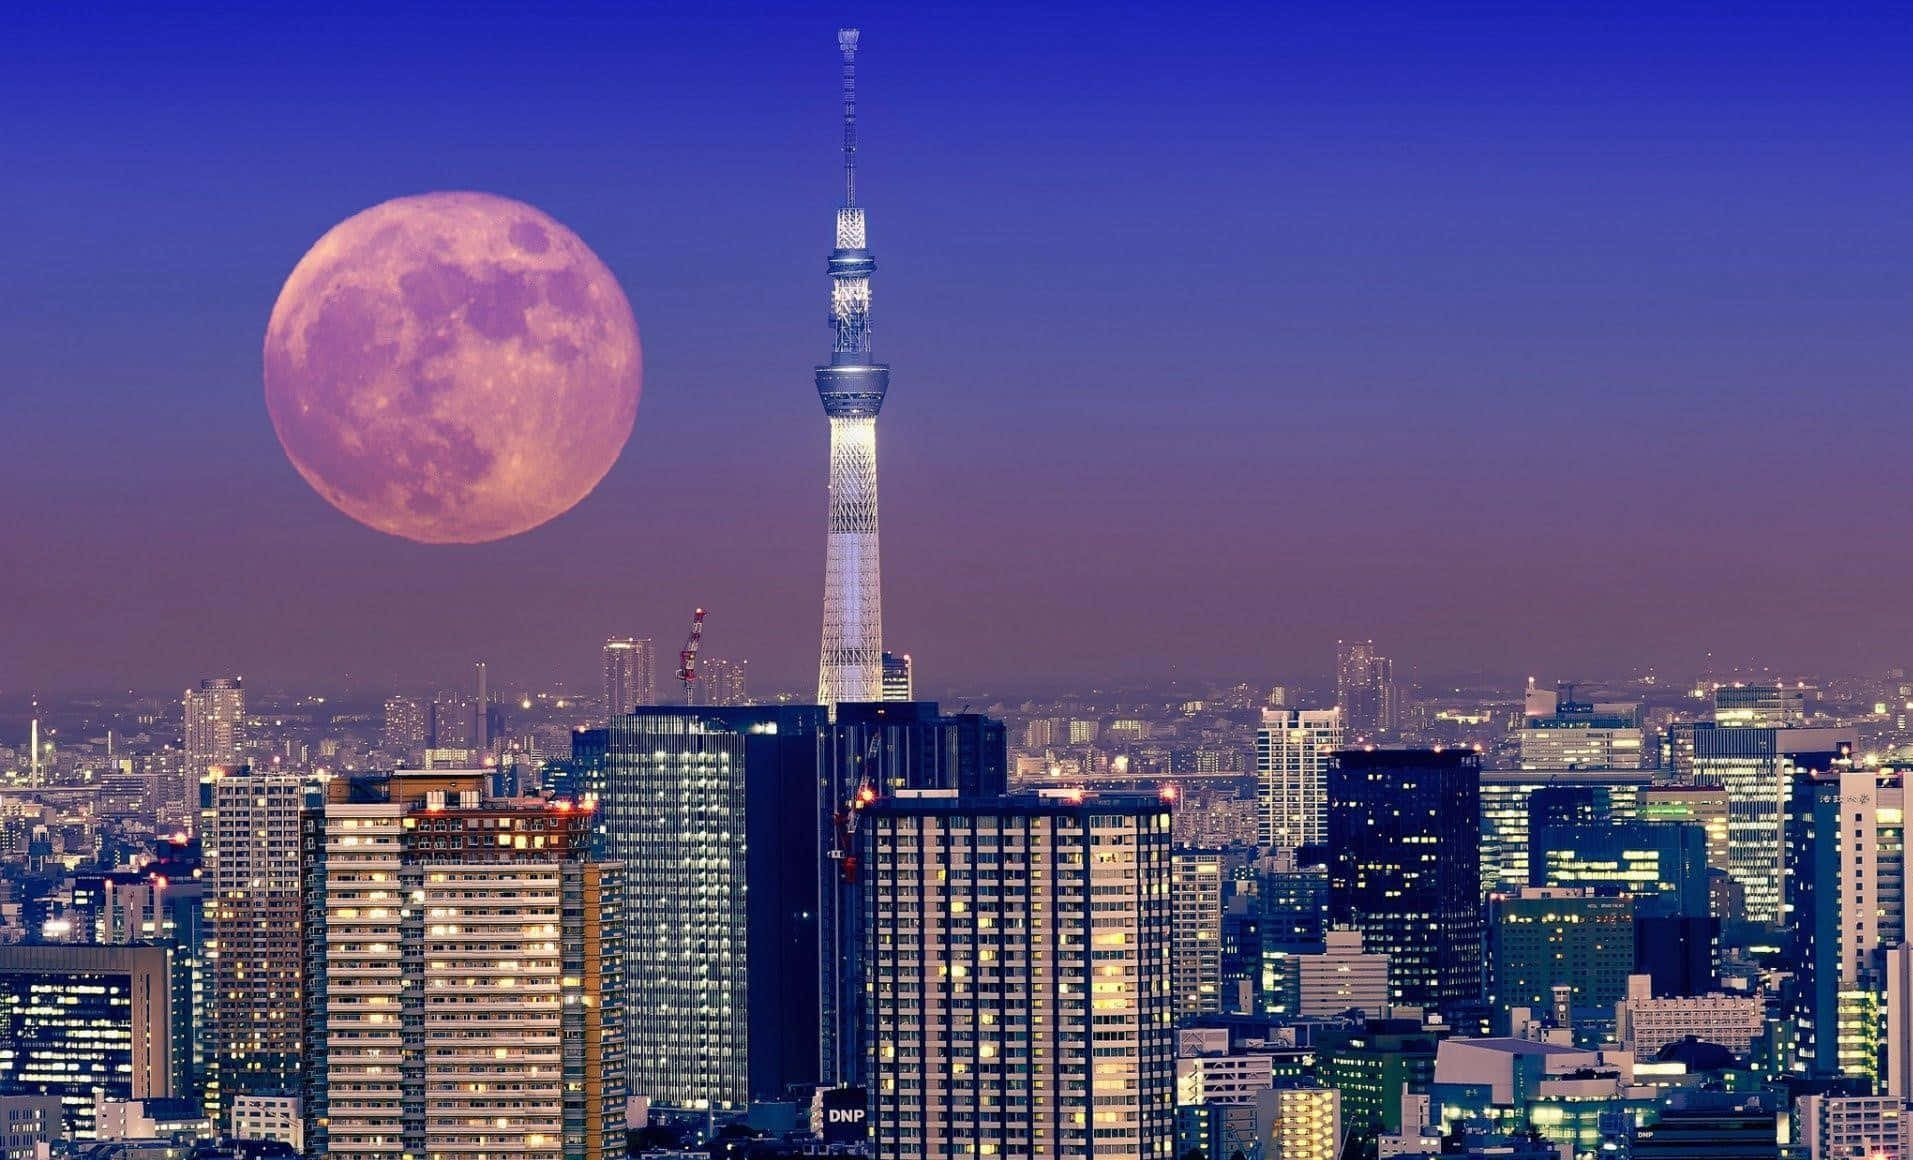 A Pink Moon Is Seen Over A City With Tall Buildings Wallpaper